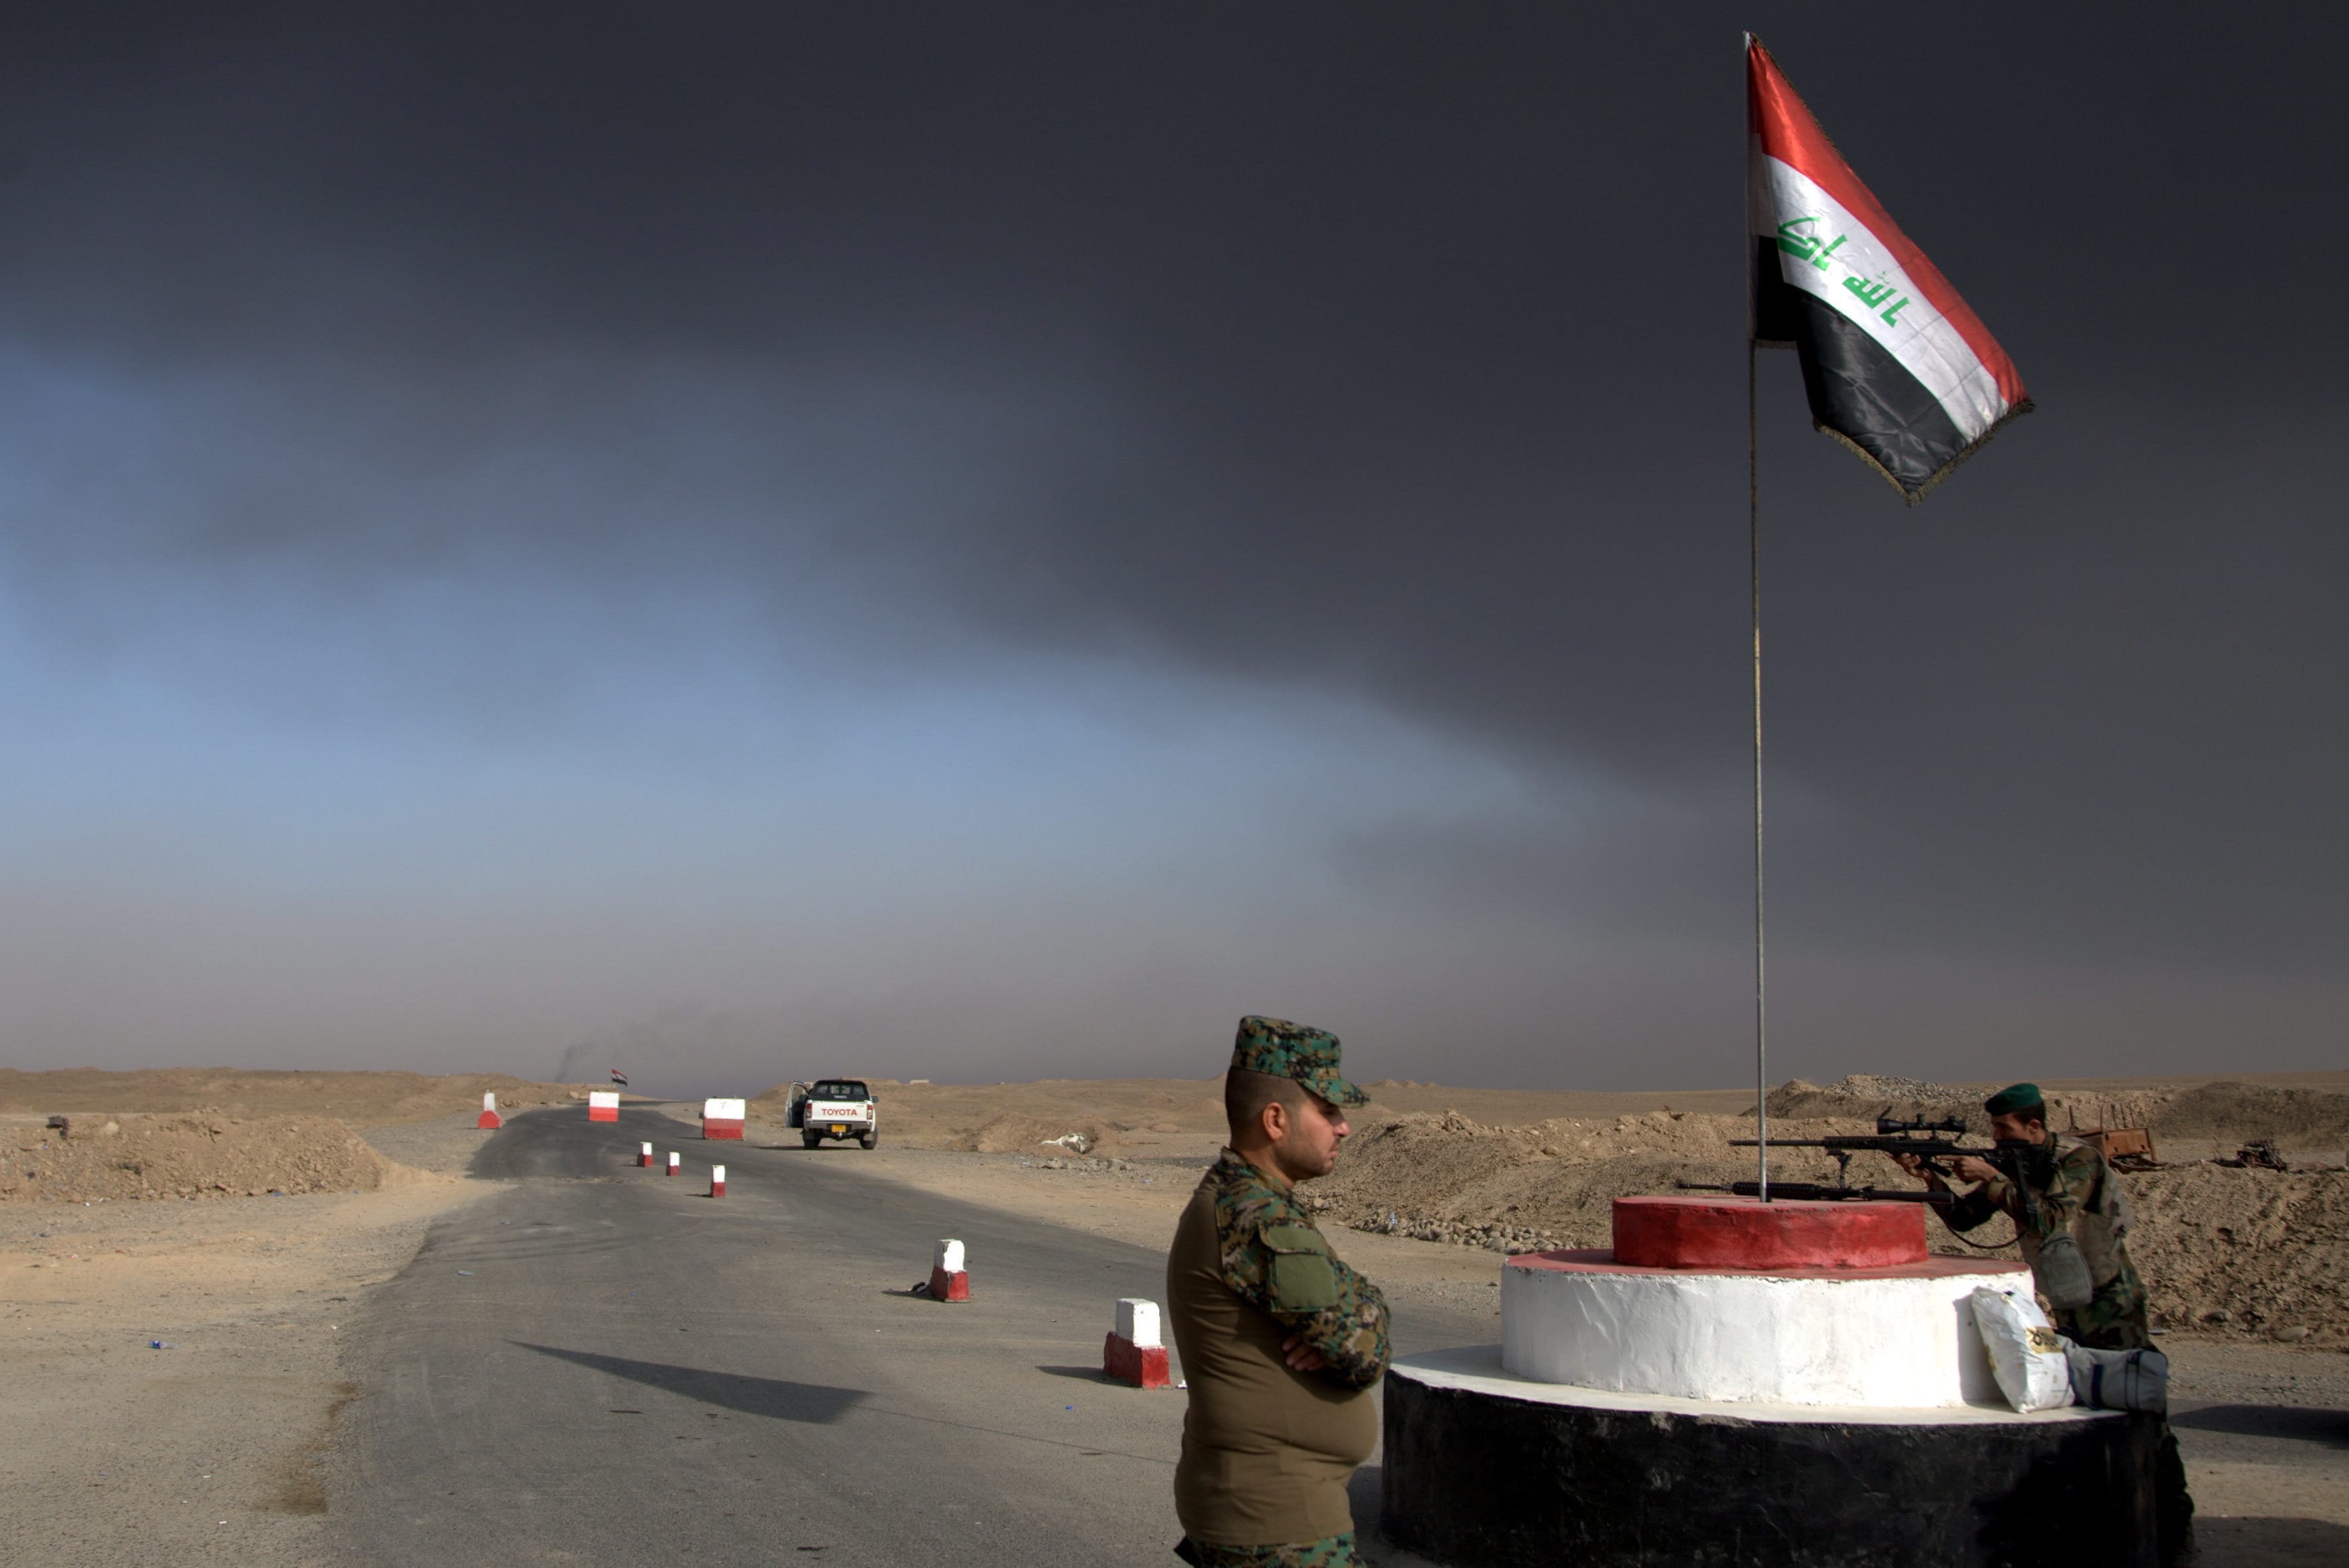 Iraqi troops guards a checkpoint near the village of Awsaja, Iraq, as smoke from fires lit by Islamic State militants at oil wells and a sulfur plant fills the air on Saturday, Oct. 22, 2016. U.S. military officials say that a fire at the sulfur plant in northern Iraq is creating a potential breathing hazard for American forces and other troops at a logistical base south of Mosul.